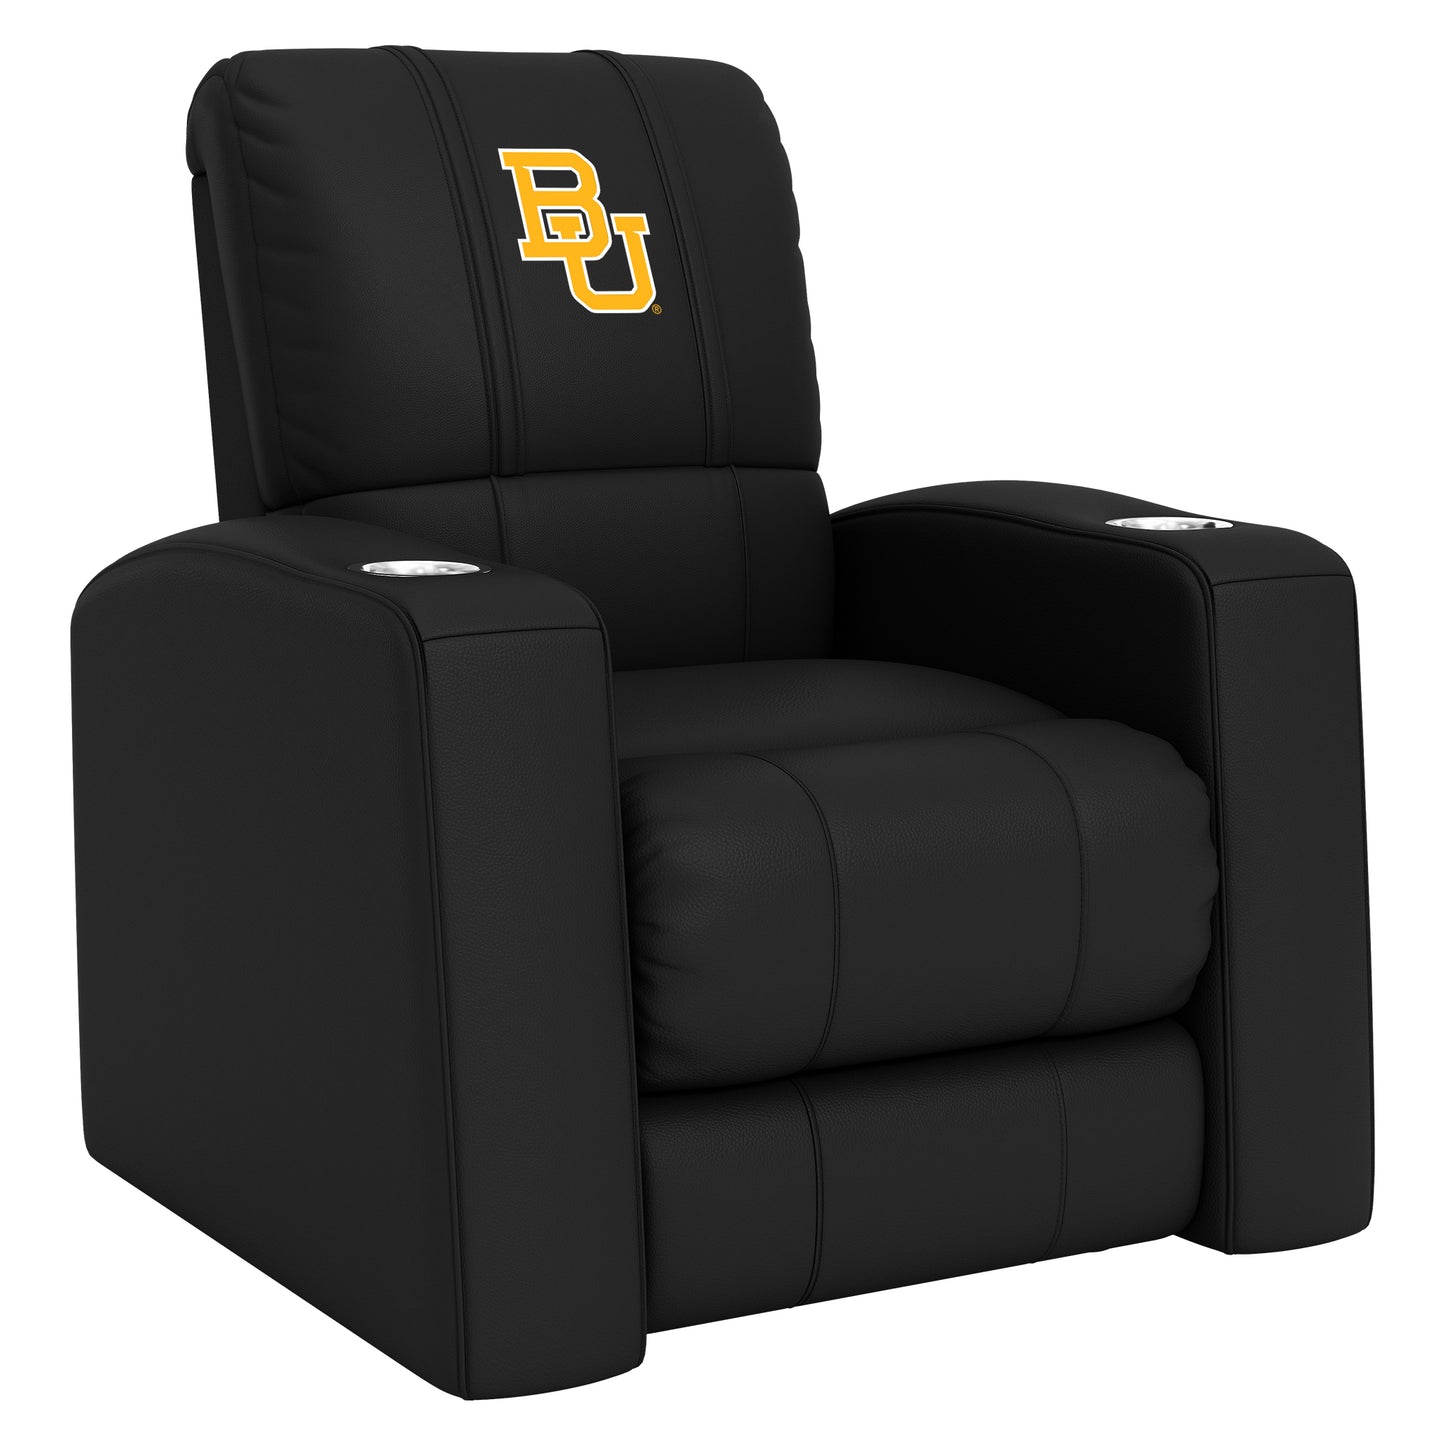 Relax Home Theater Recliner with Baylor Bears Logo